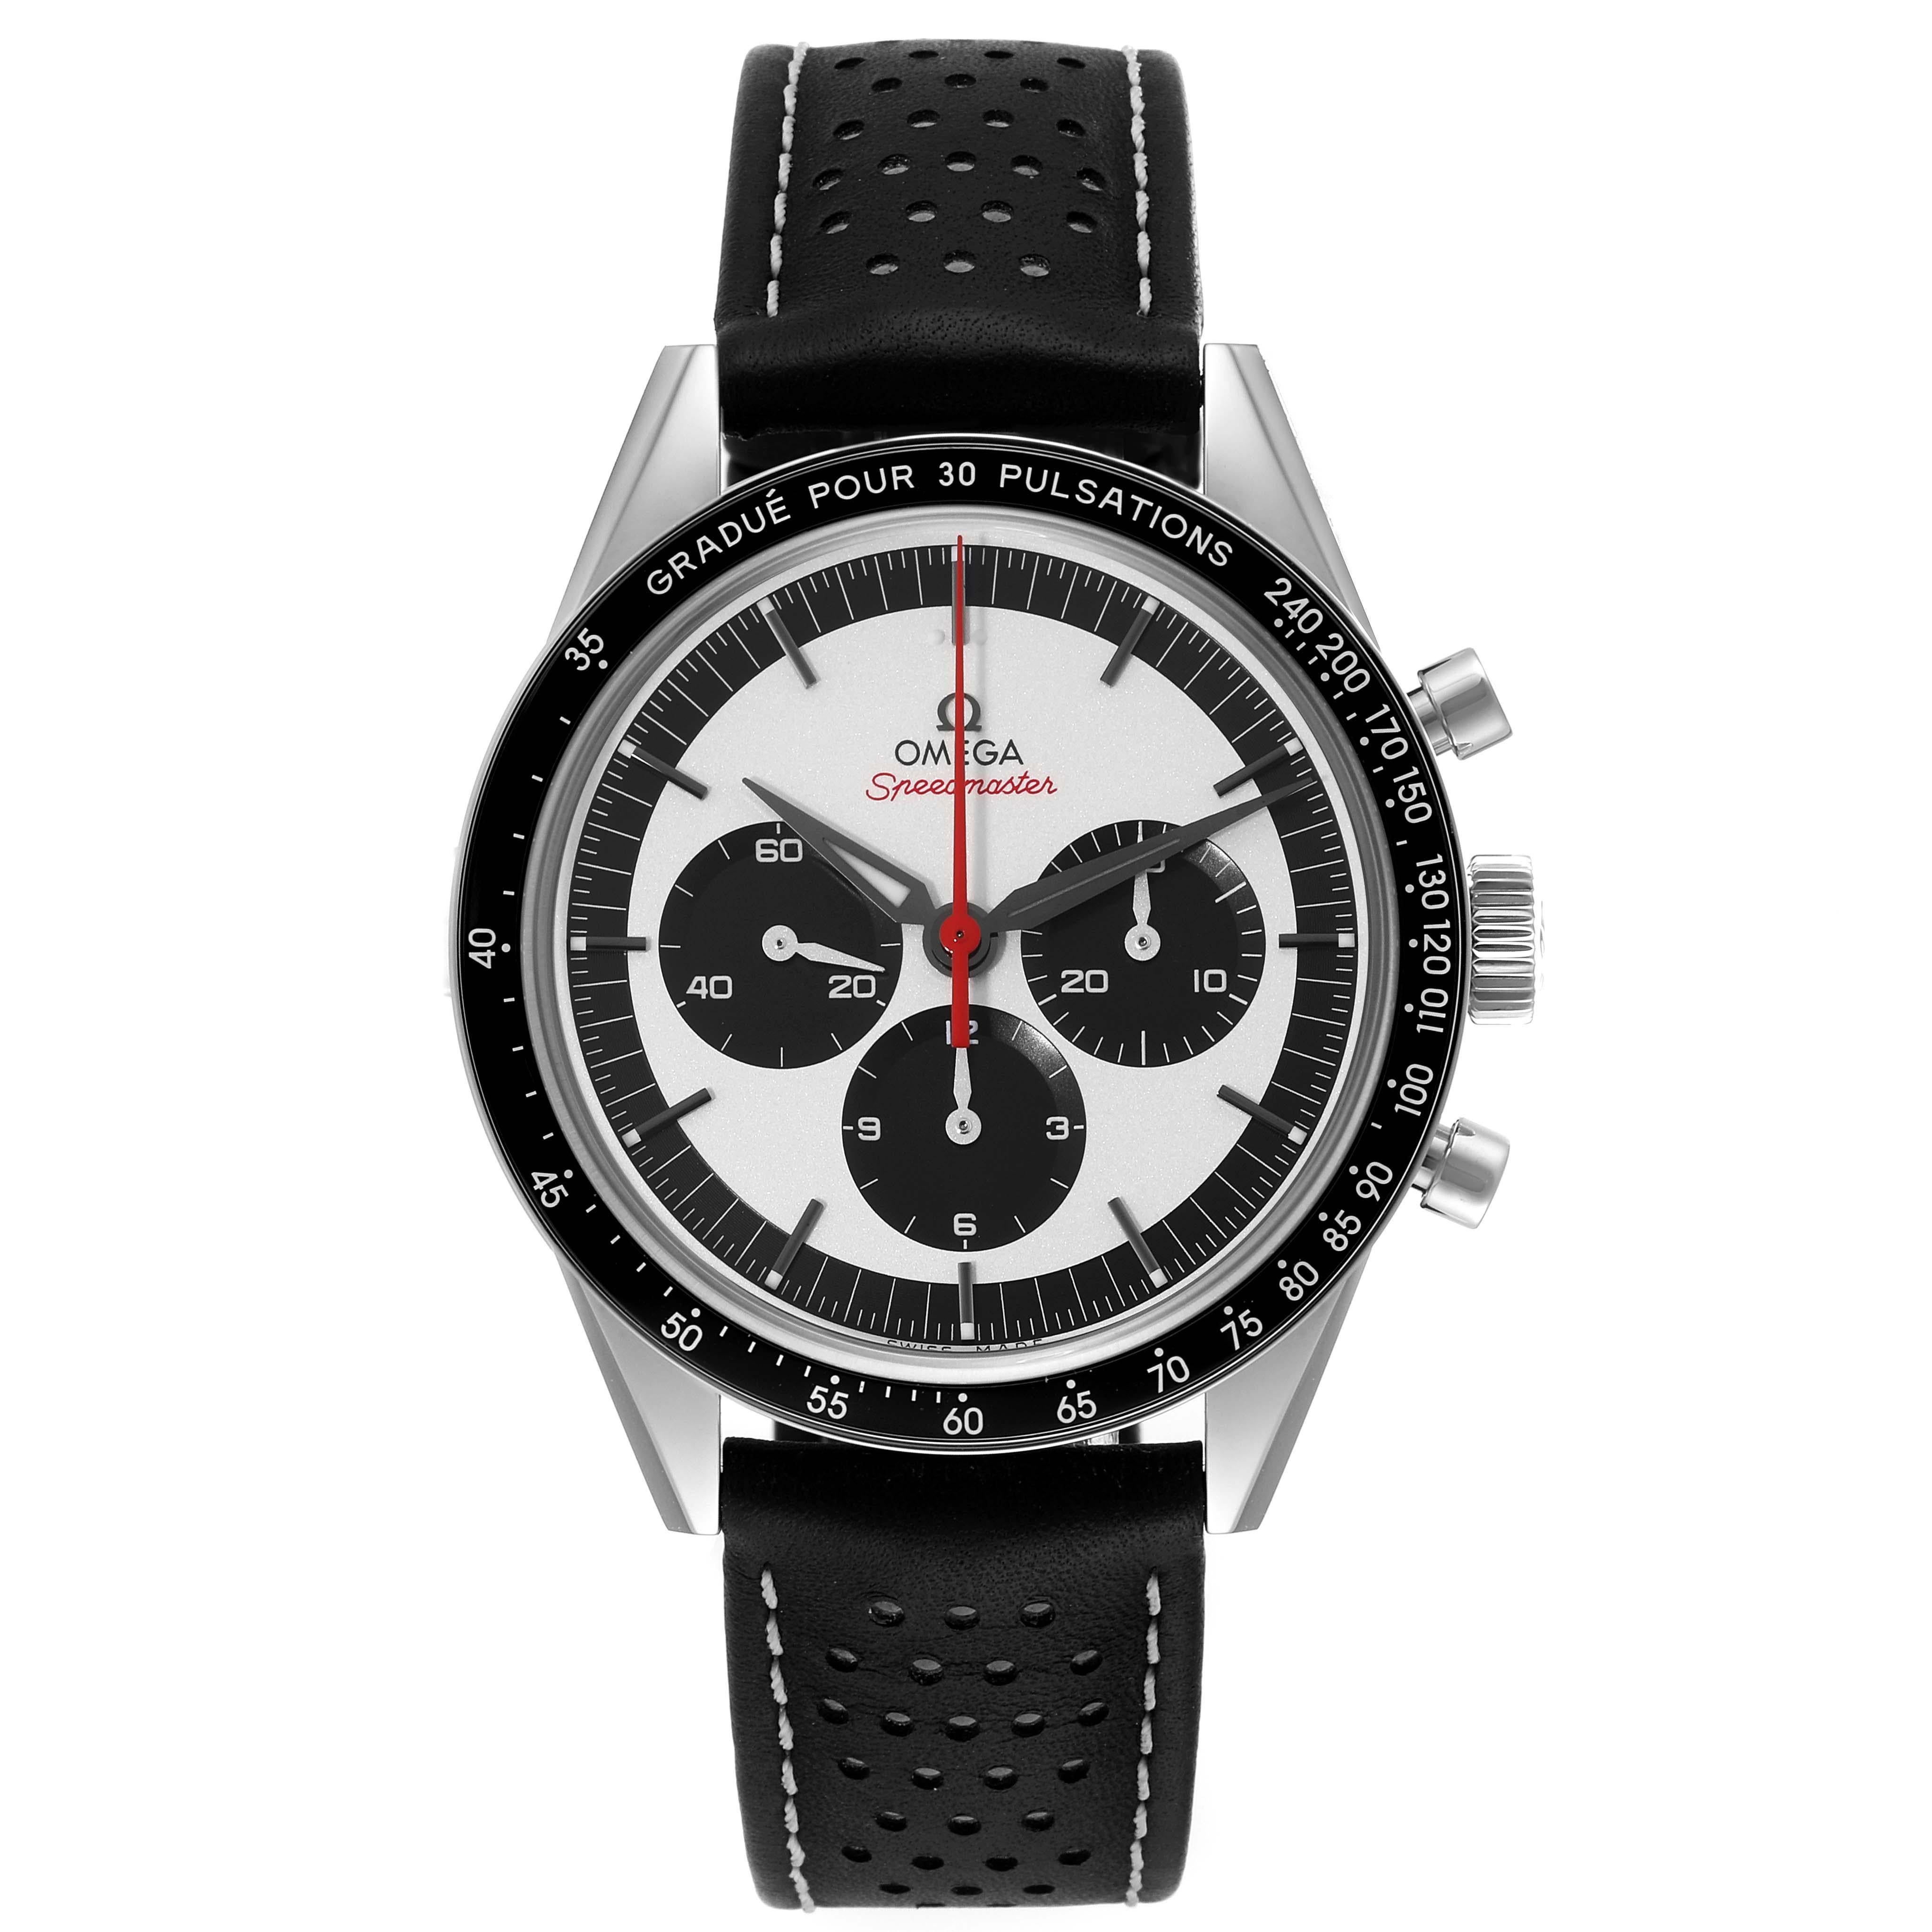 Omega Speedmaster Limited Edition Steel Mens Watch 311.32.40.30.02.001 Card. Manual winding chronograph movement. Caliber 1861. Stainless steel round case 39.7 mm in diameter. The Limited Edition number and the original Seahorse medallion embossed